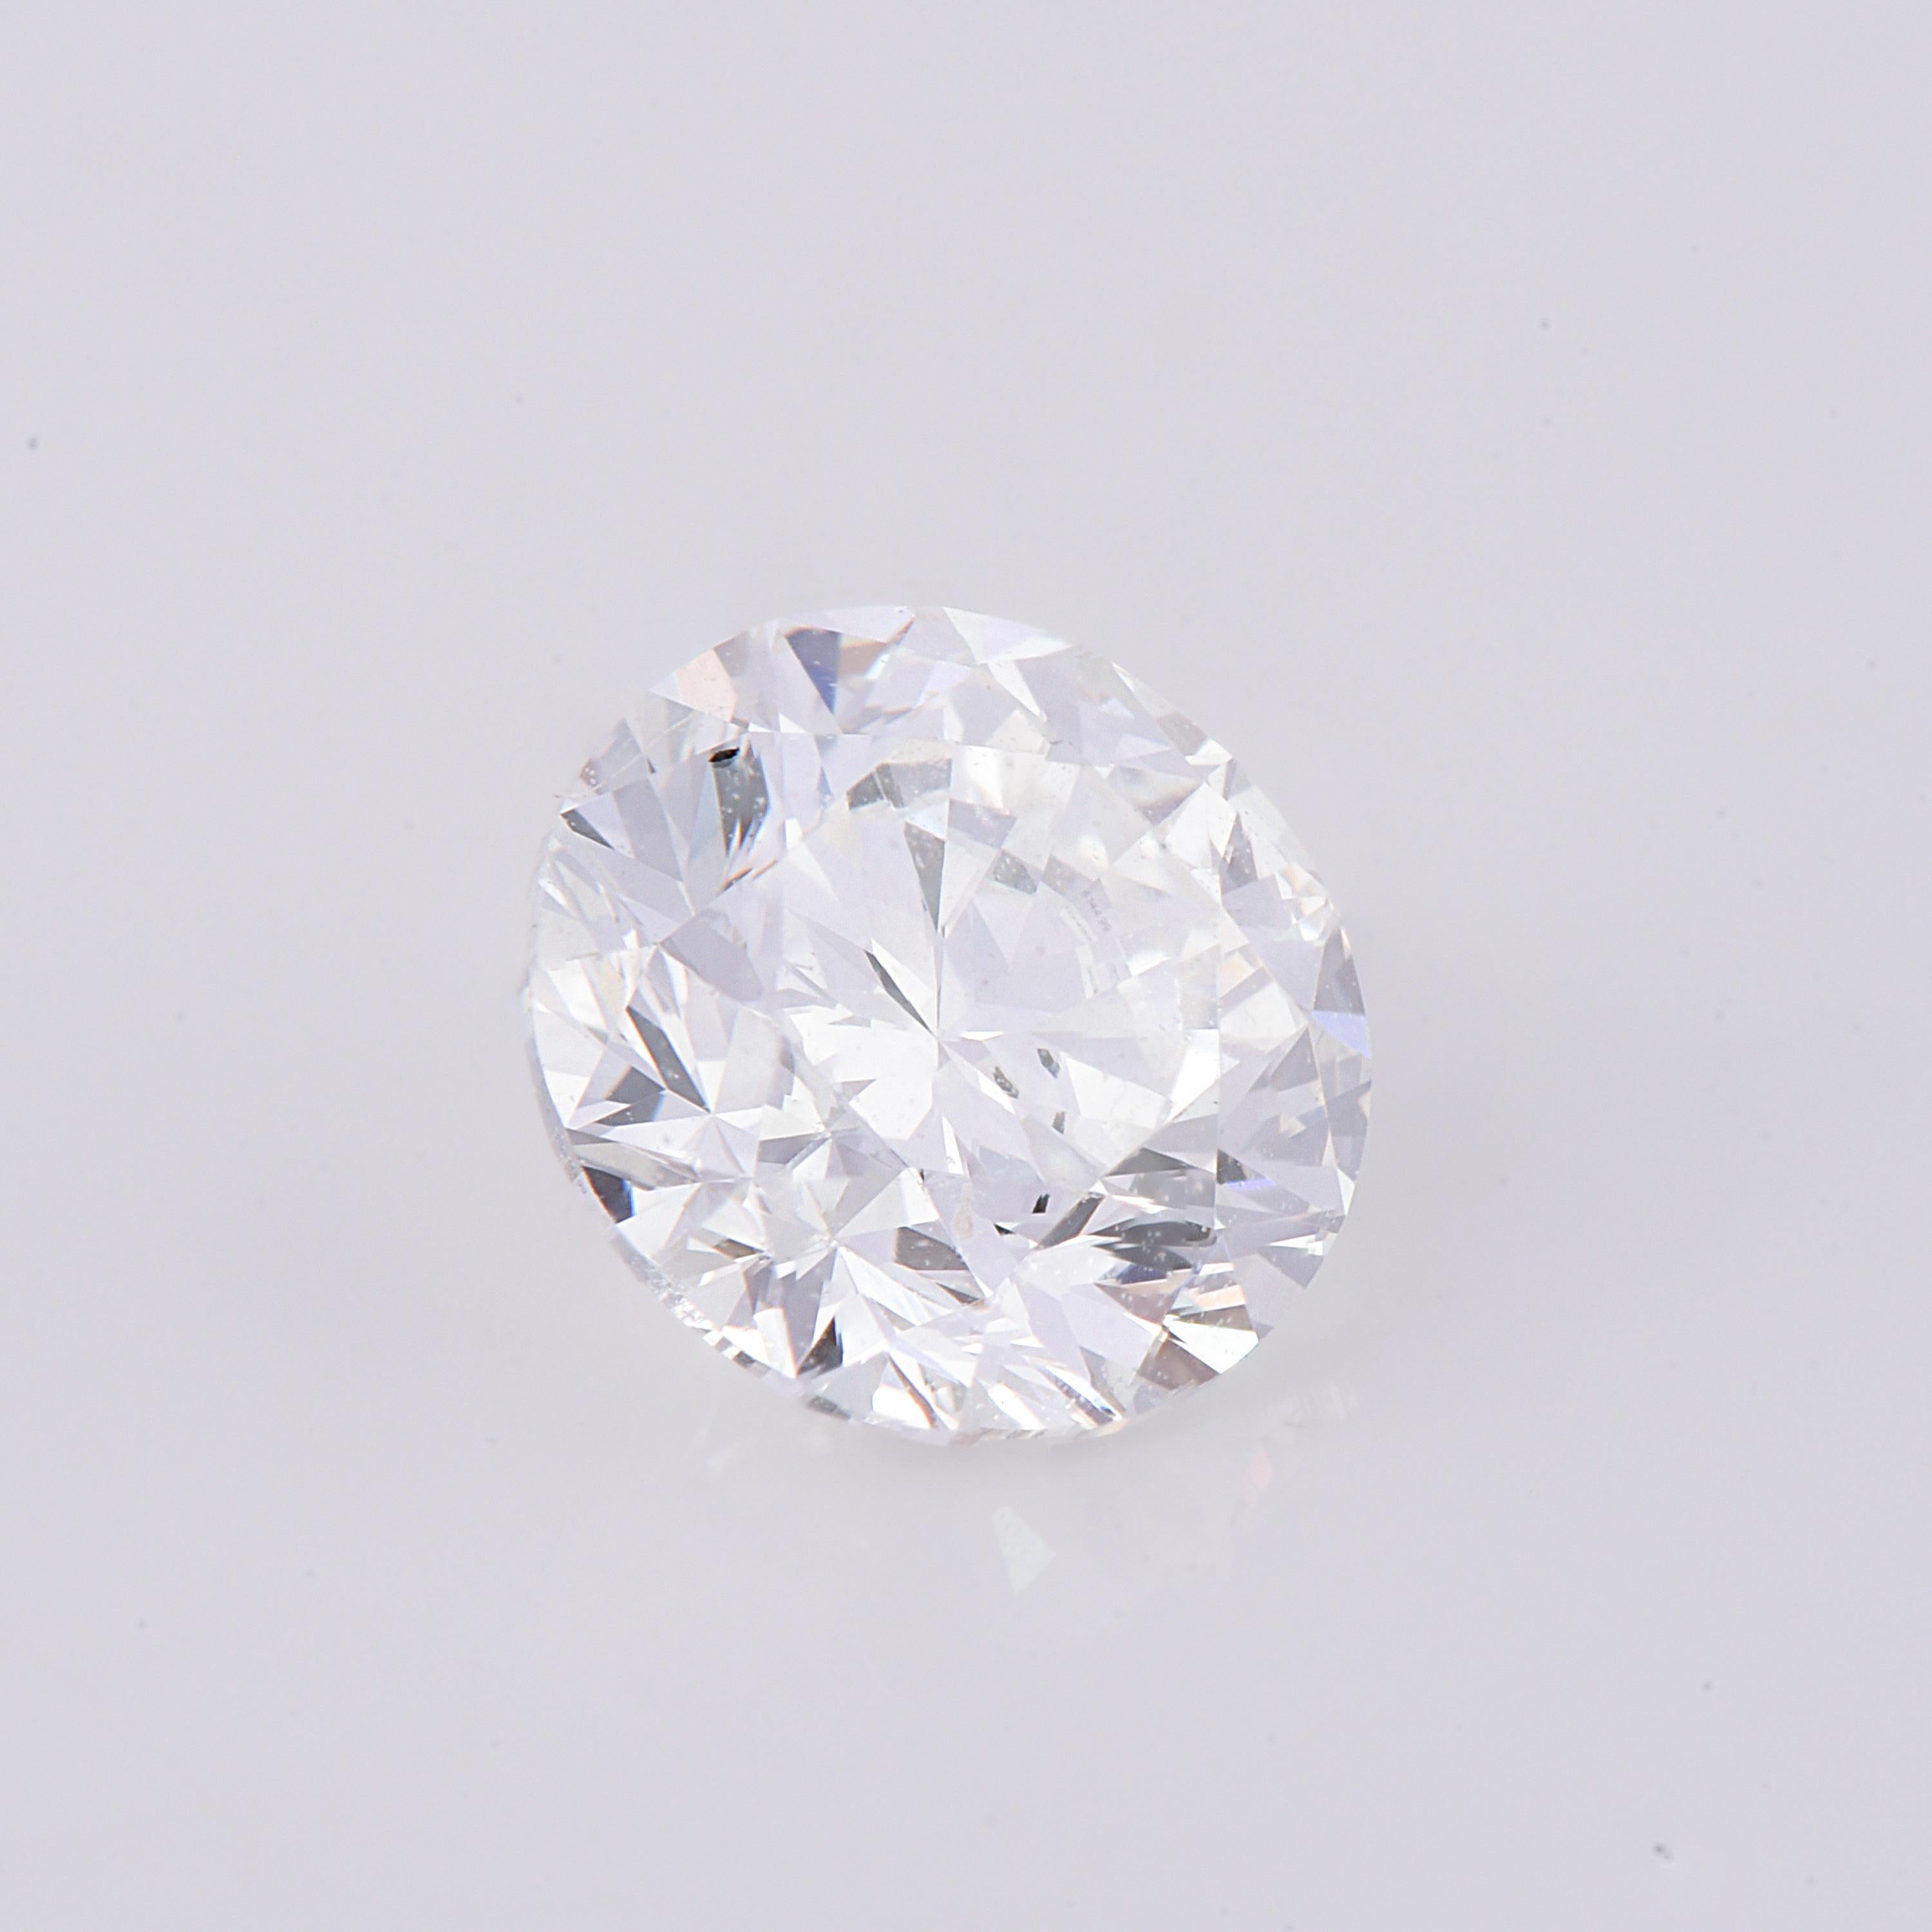 1.00 carat colorless diamond – certified as F color, VS1 clarity by GIA, this diamond exhibits ideal brilliance, excellent polish and very good symmetry. Measuring 6.19-6.26 x 3.98 mm, this diamond can be set into an engagement ring or any other